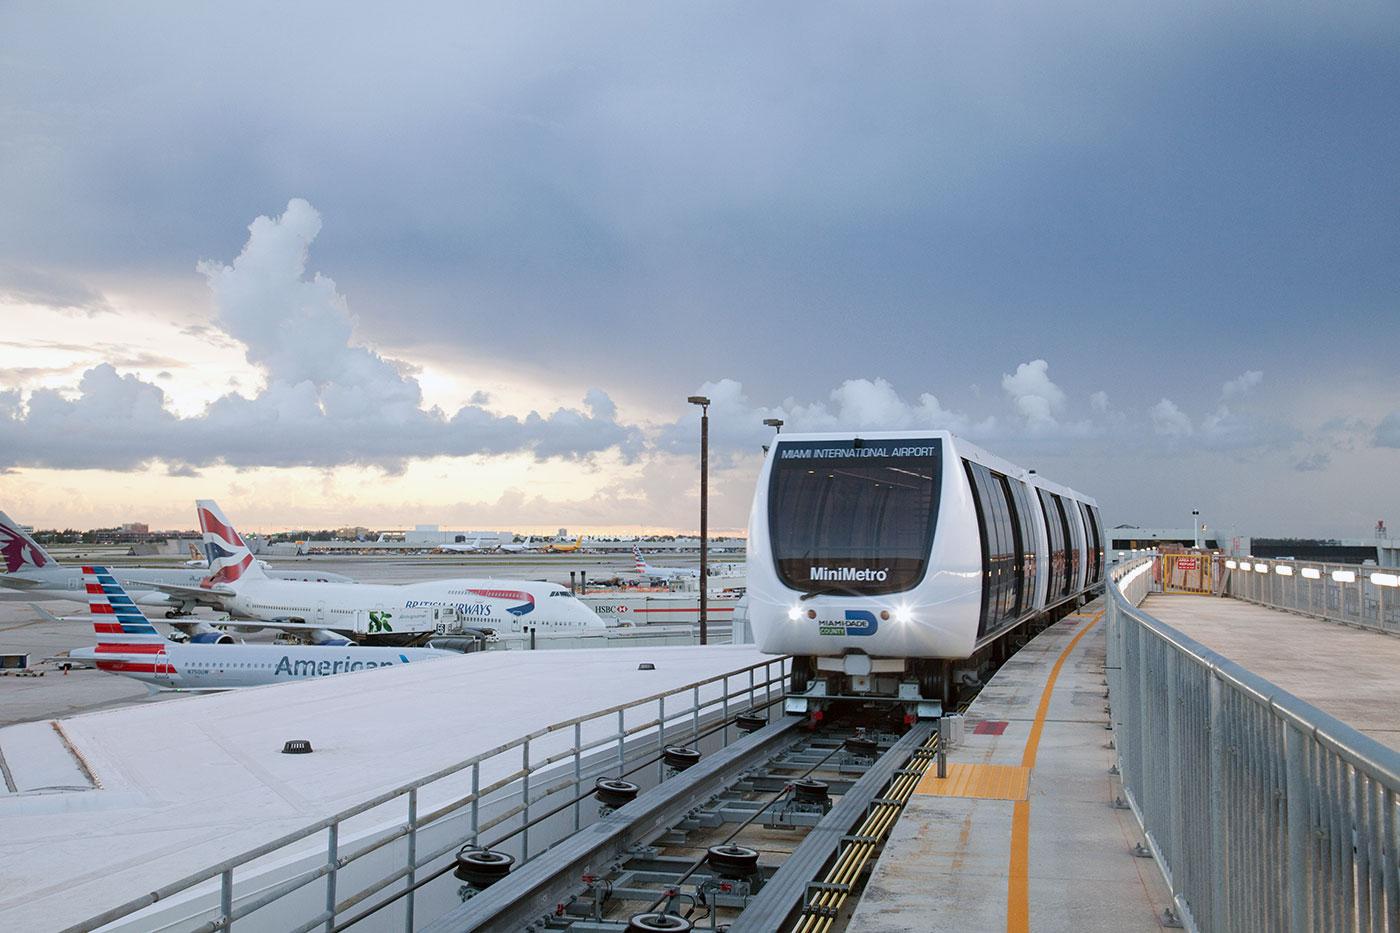 E-Gate Automated People Mover, Miami-Dade International Airport, Florida